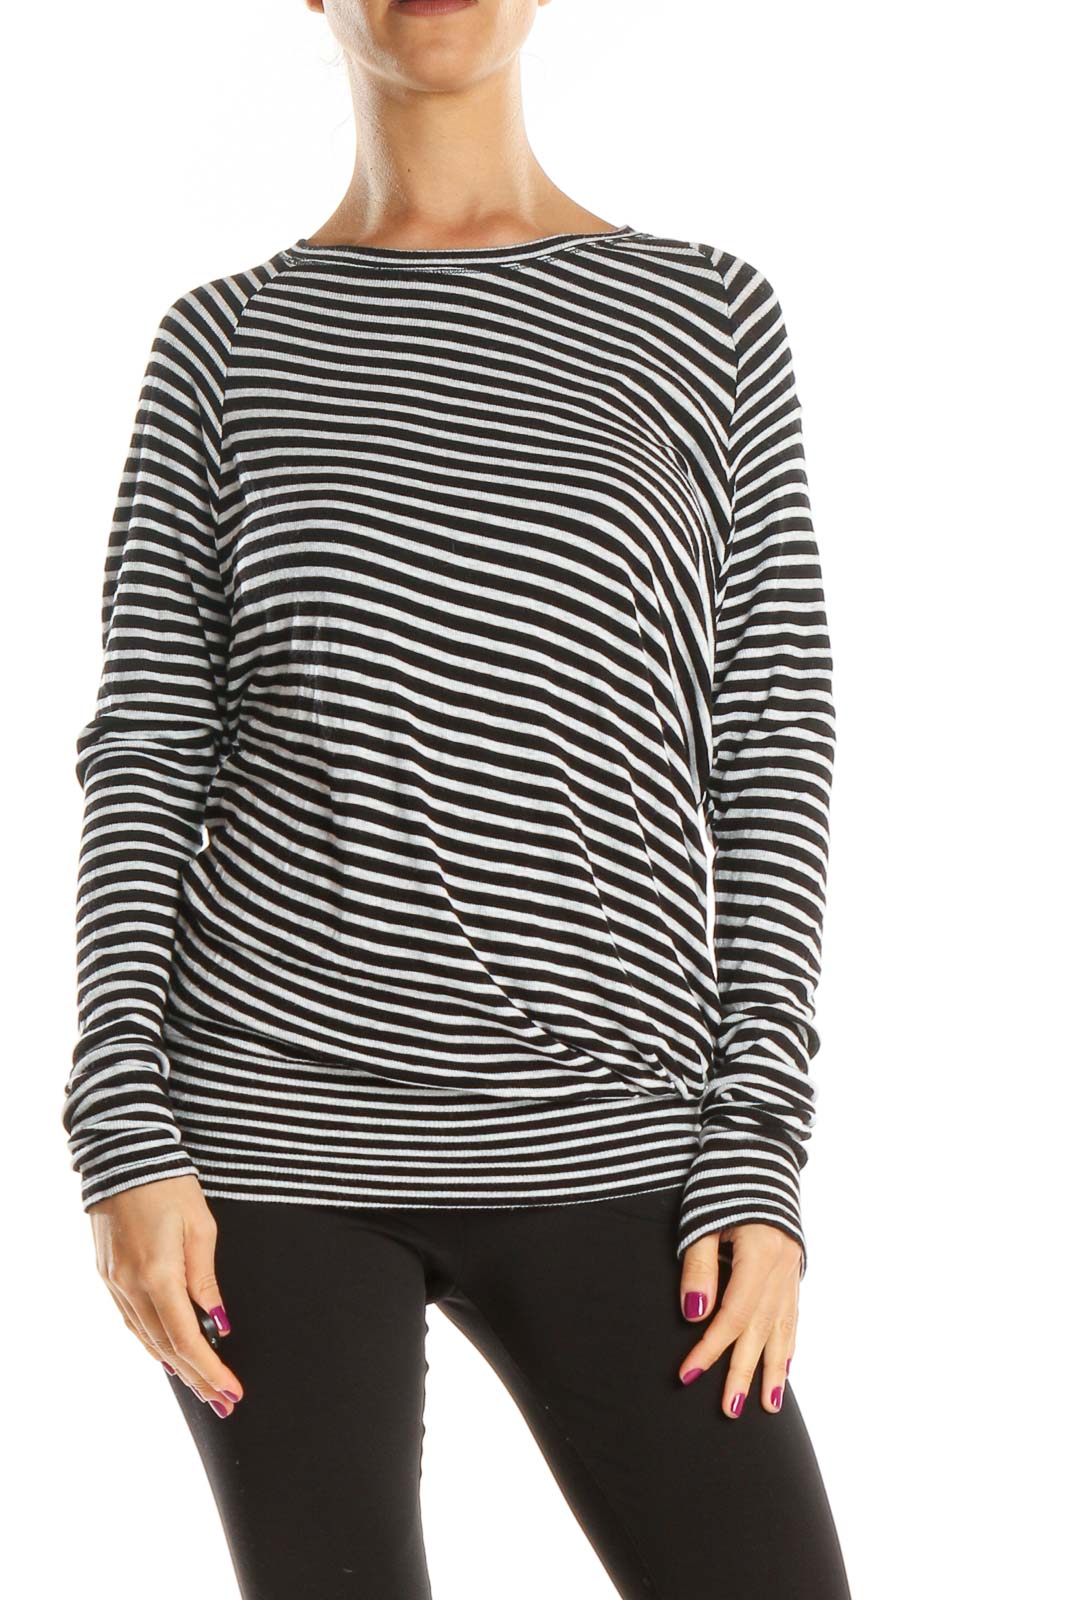 Black Striped All Day Wear T-Shirt Front